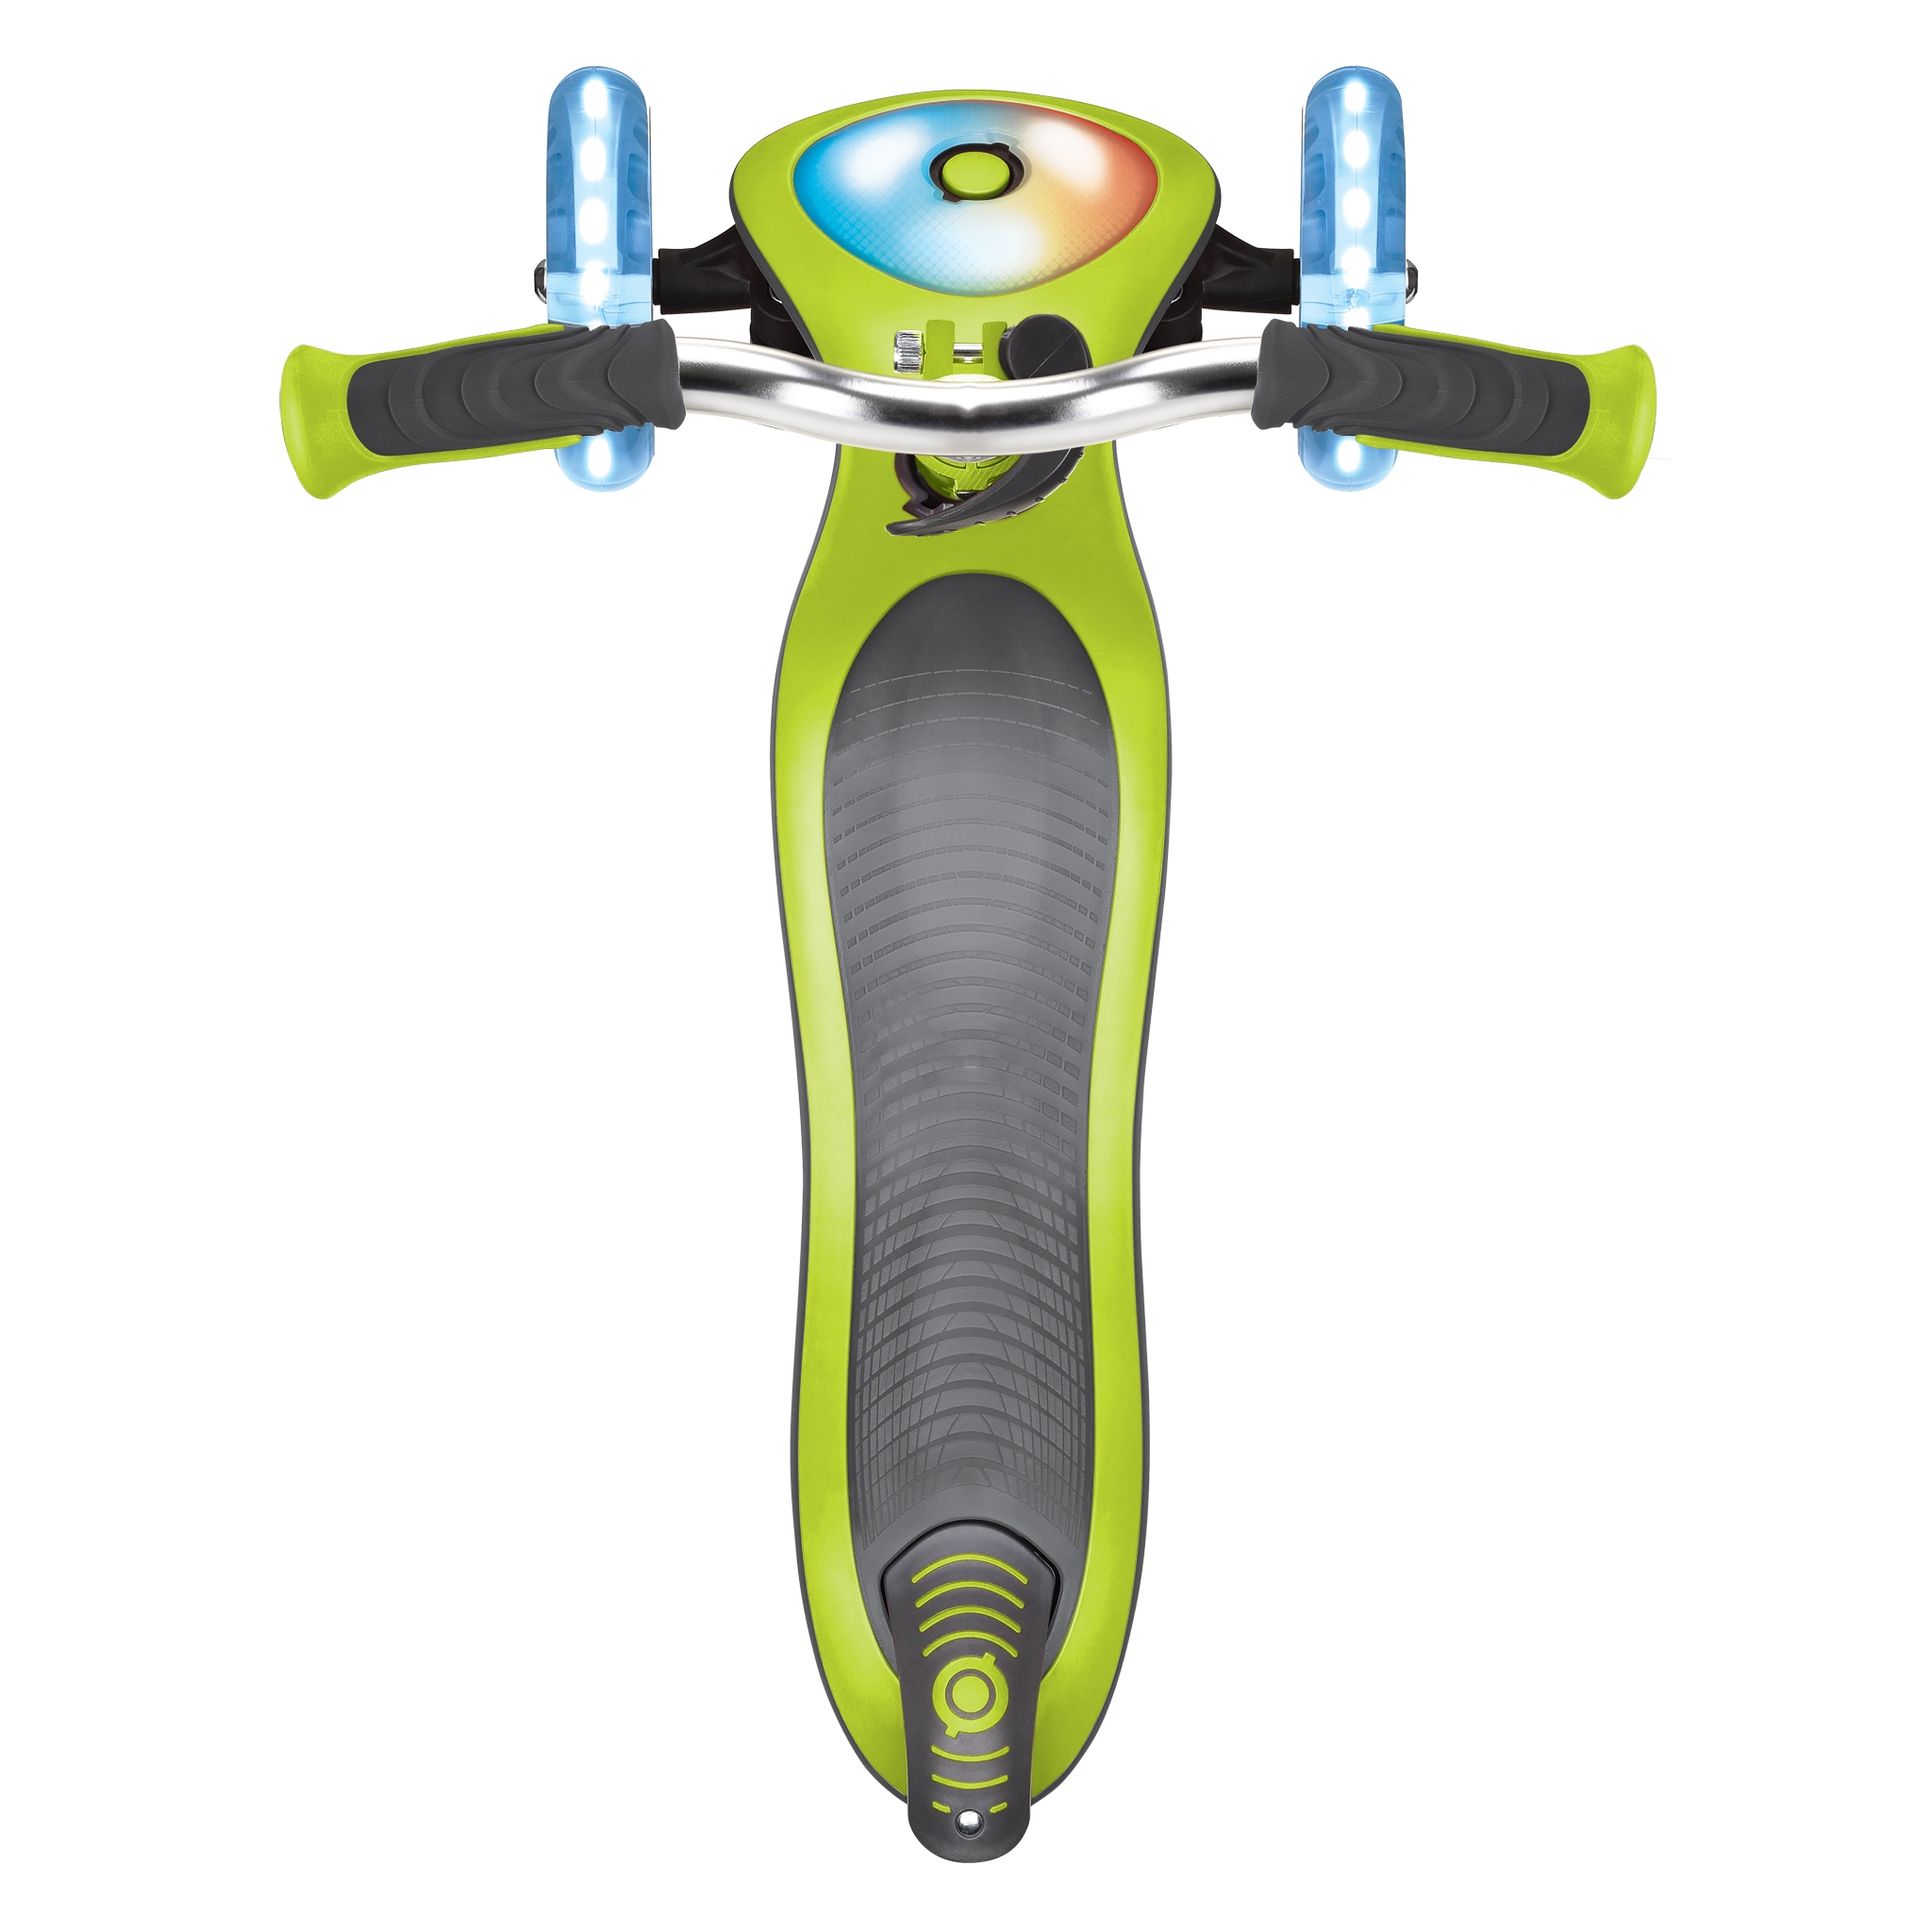 Globber-ELITE-PRIME-best-3-wheel-foldable-scooter-for-kids-with-light-up-scooter-deck-lime-green 2